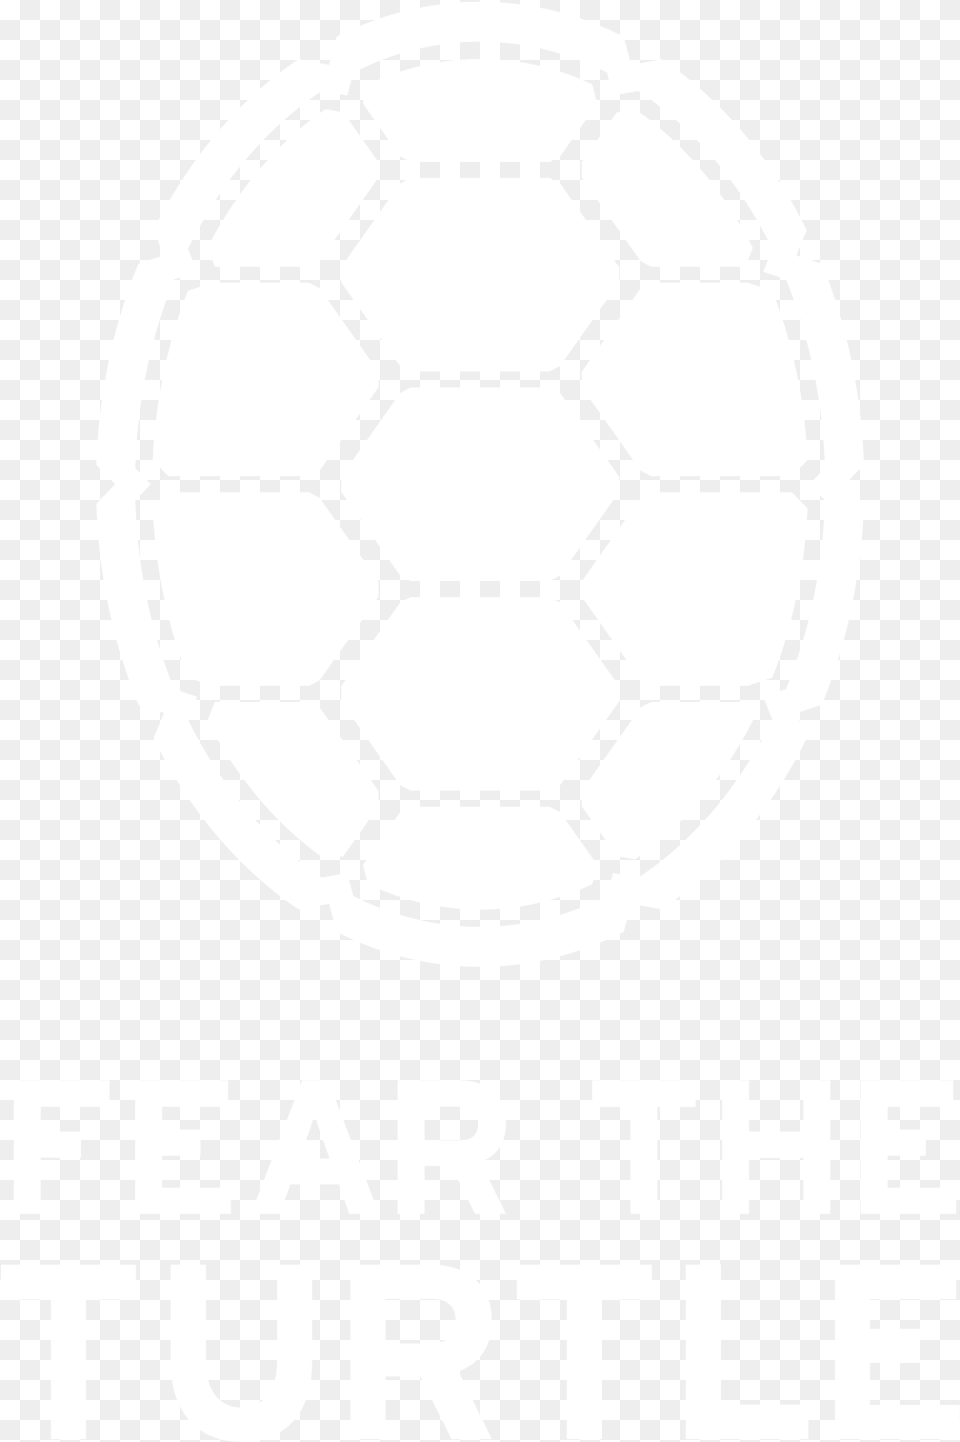 Fear The Turtle Marks White, Ball, Football, Soccer, Soccer Ball Png Image